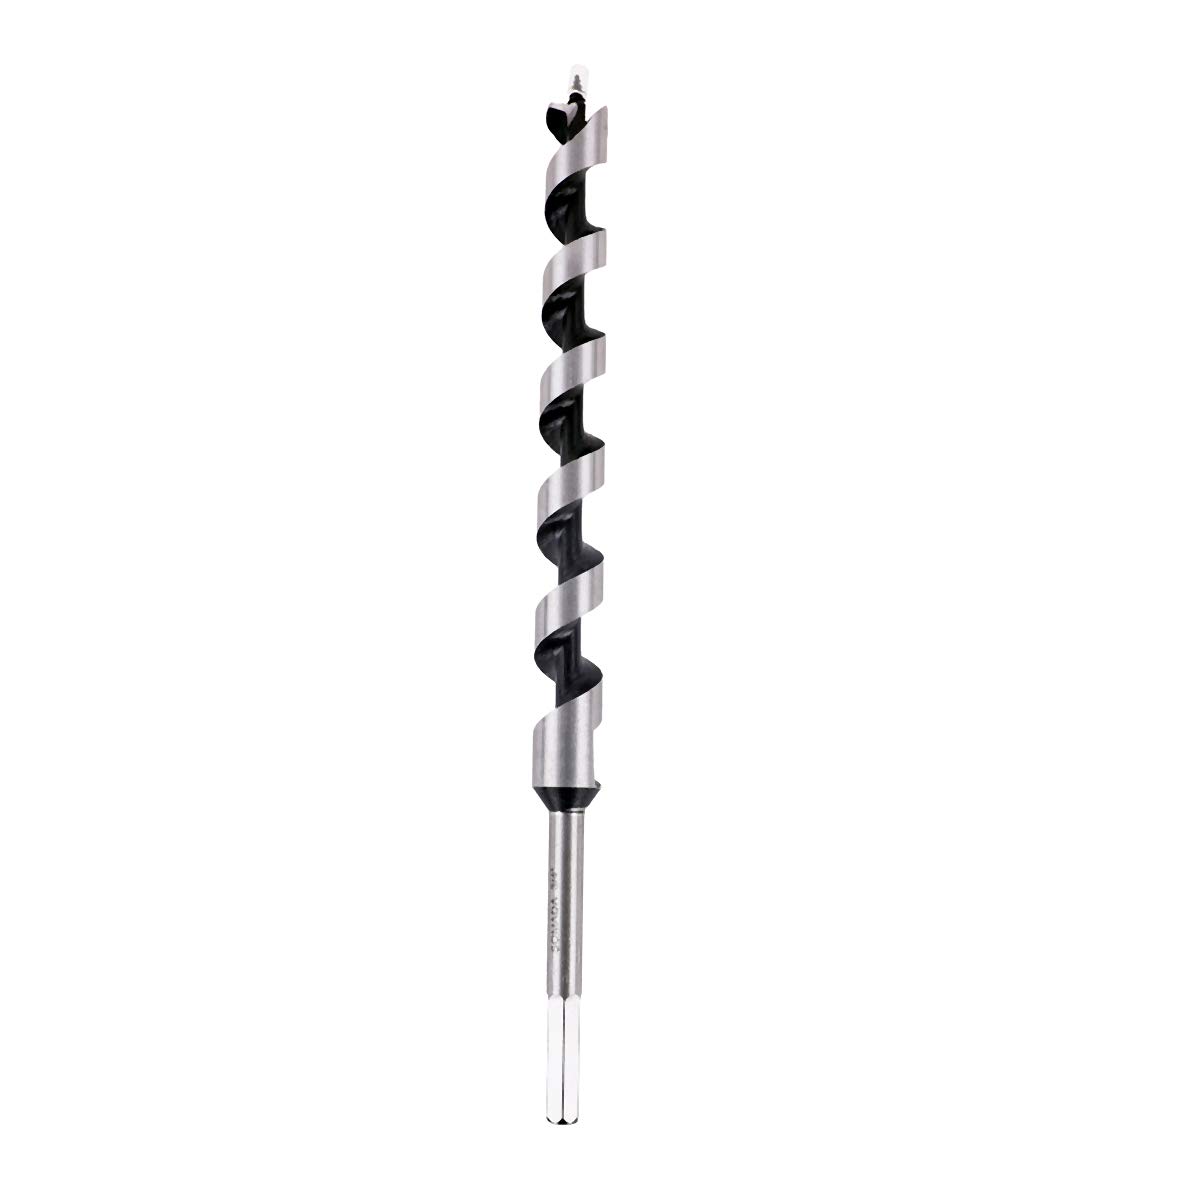 Generic SOMADA 3/4-Inch x 12-Inch Auger Drill Bit for Wood, Hex Shank 3/8-Inch, Ship Auger Long Drill Bit for Soft and Hard Wood, Plast